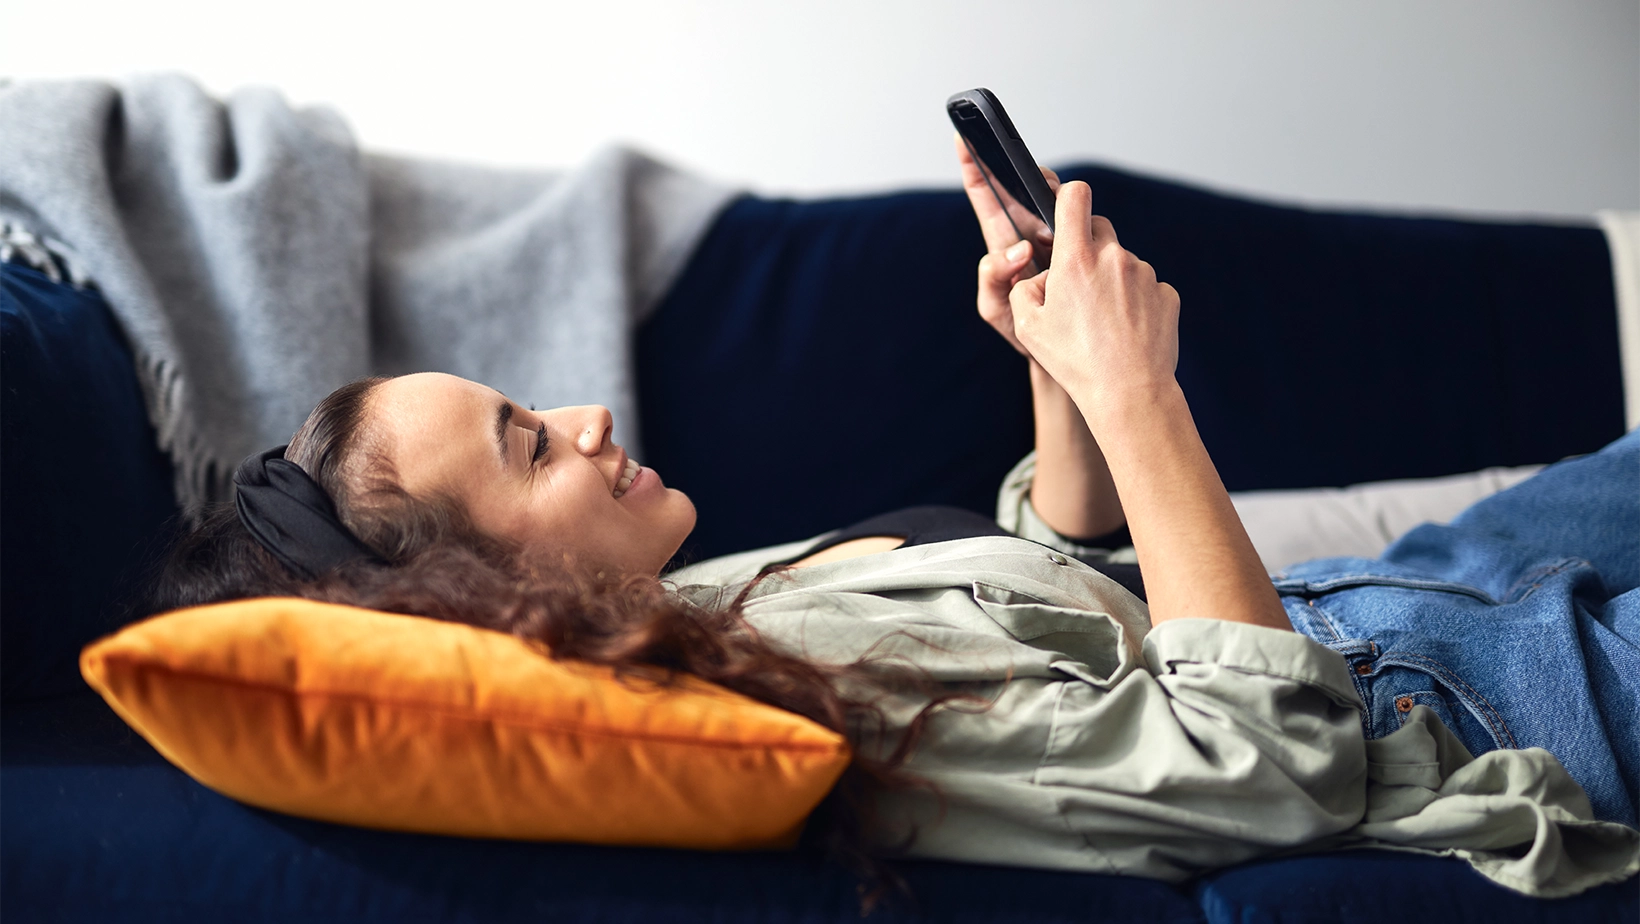 Woman looking at her phone while lying on a couch